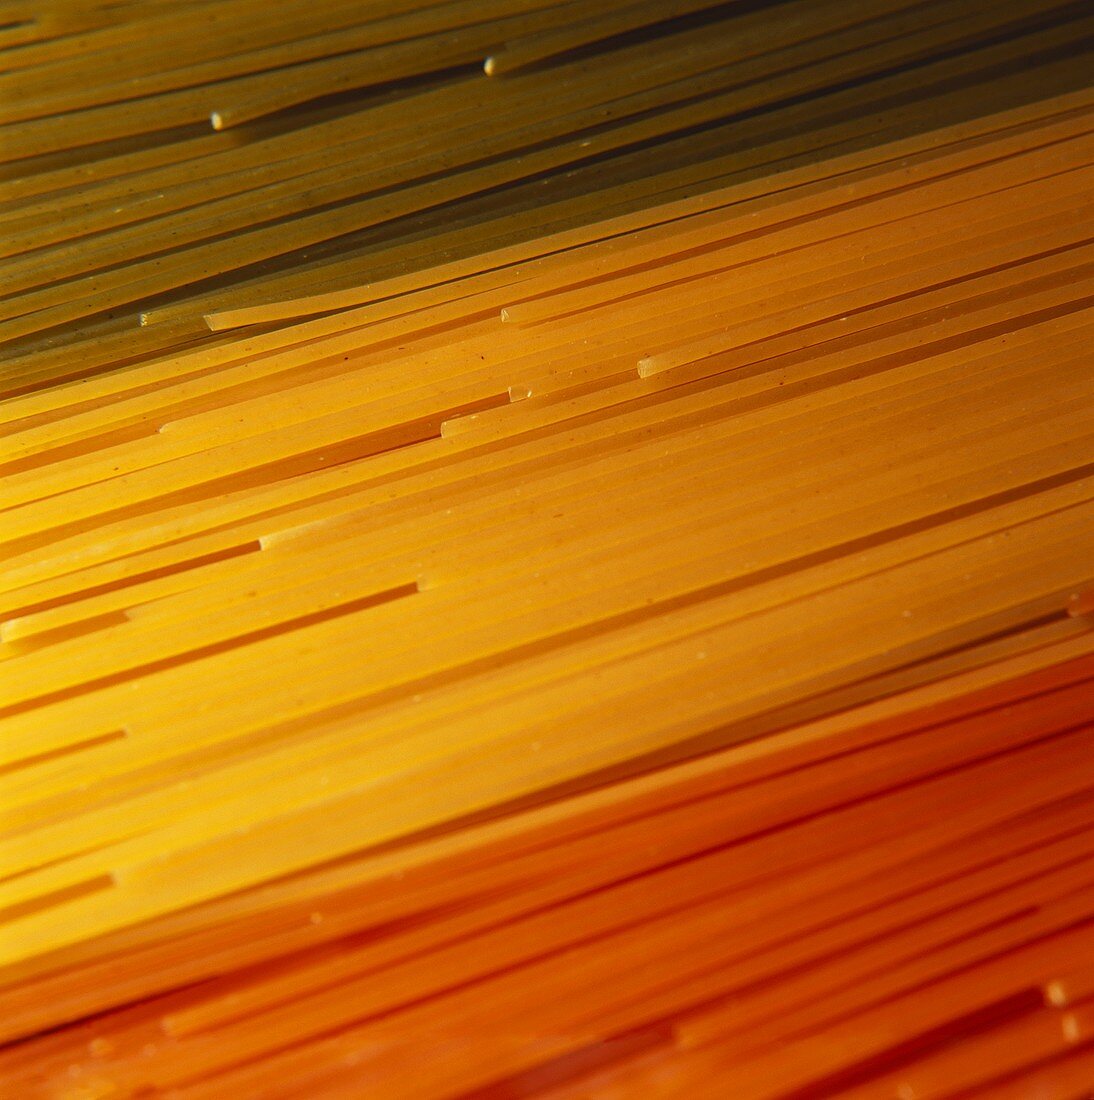 Green, yellow and red spaghetti (close-up)